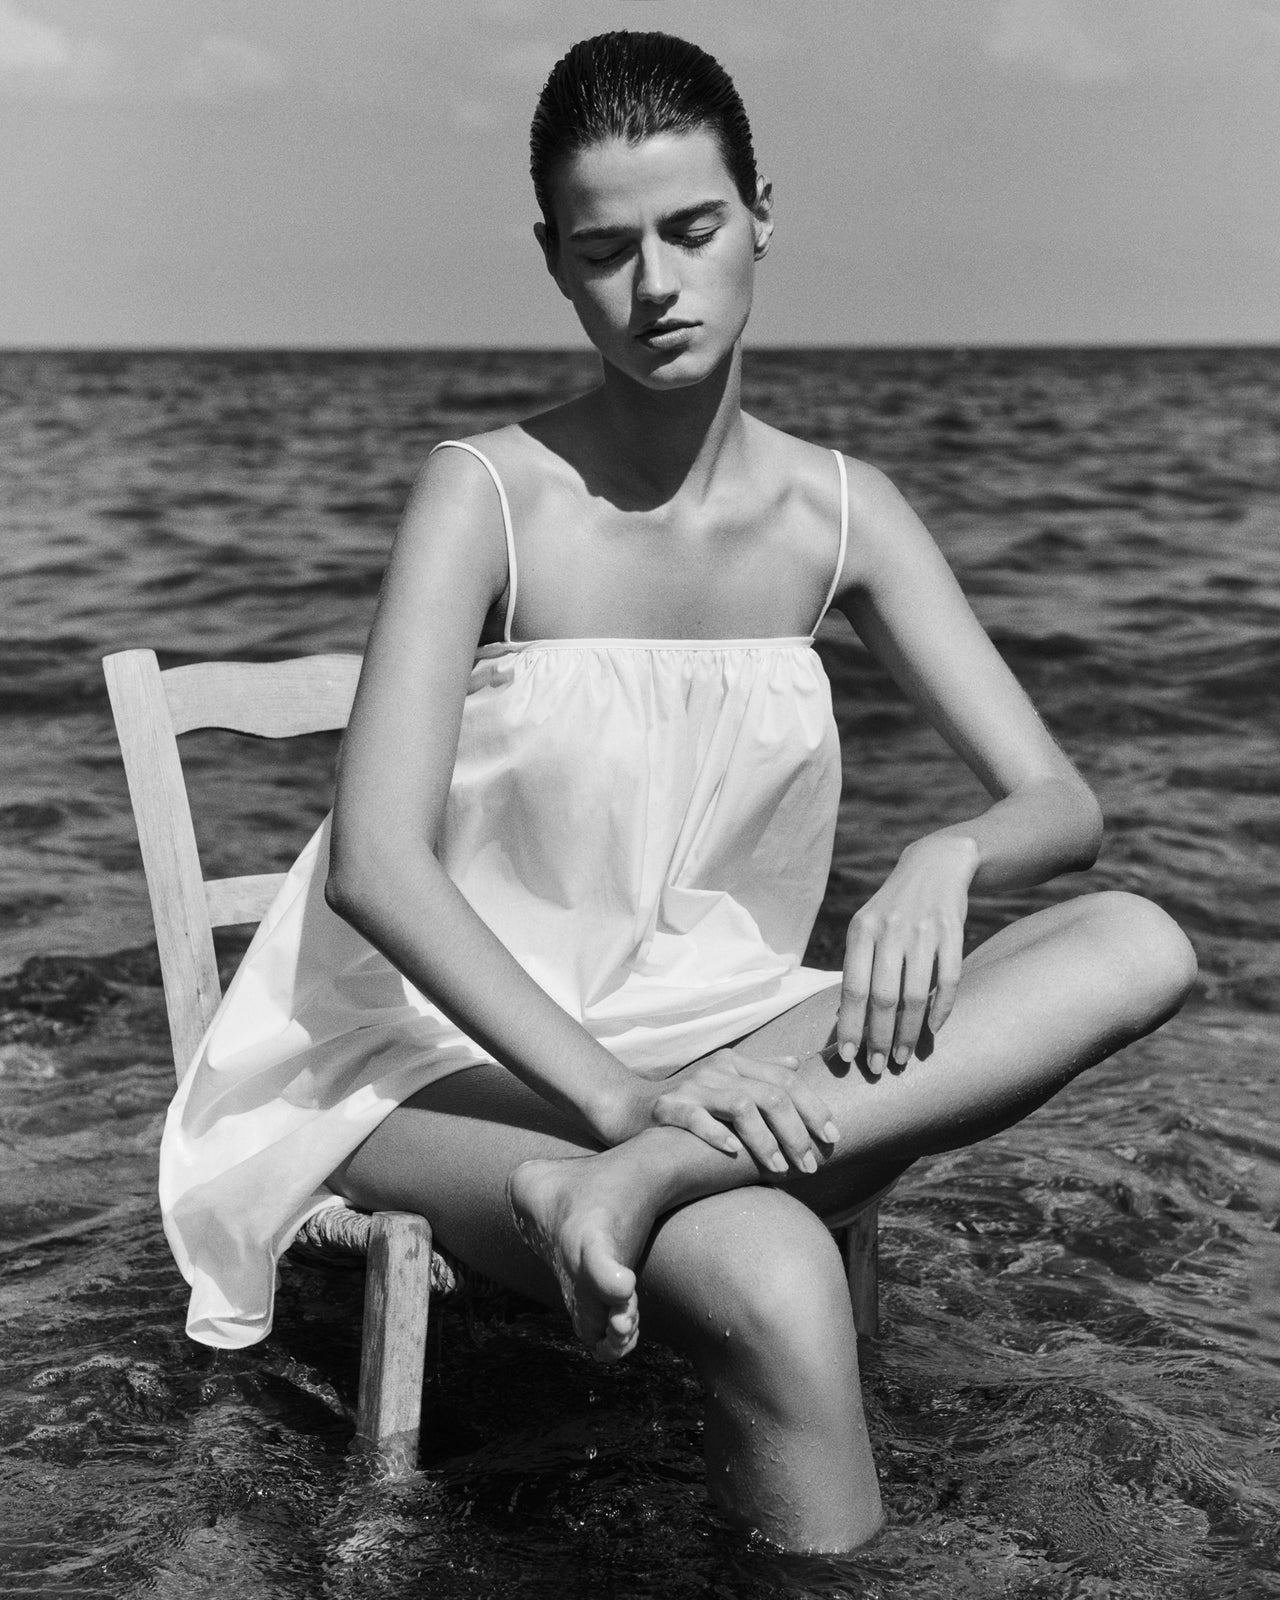 Summer in Sicily photographed by Morgan Pilcher - Matteau